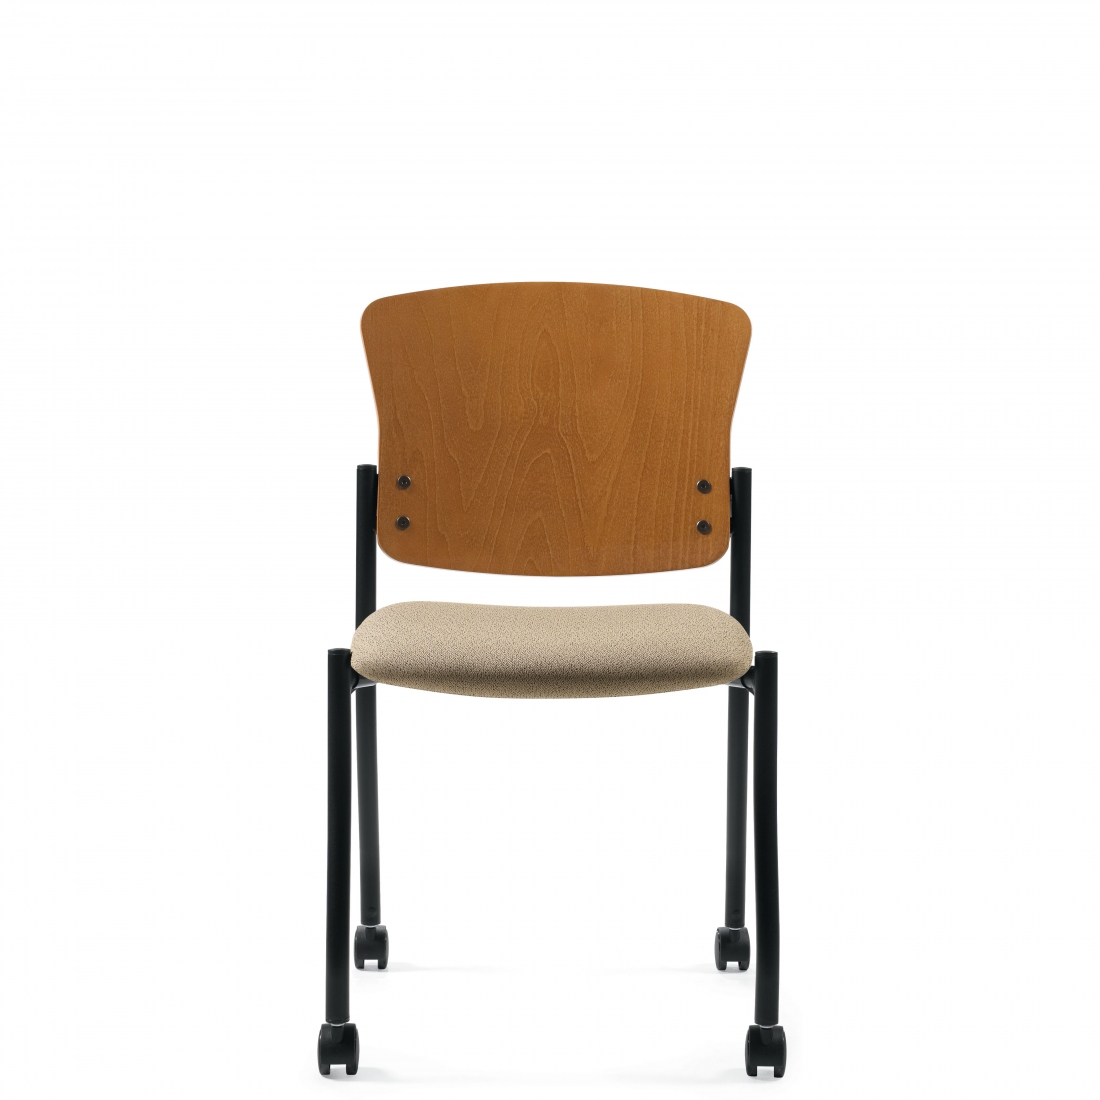 Armless Chair with Casters, Wood Veneer Back